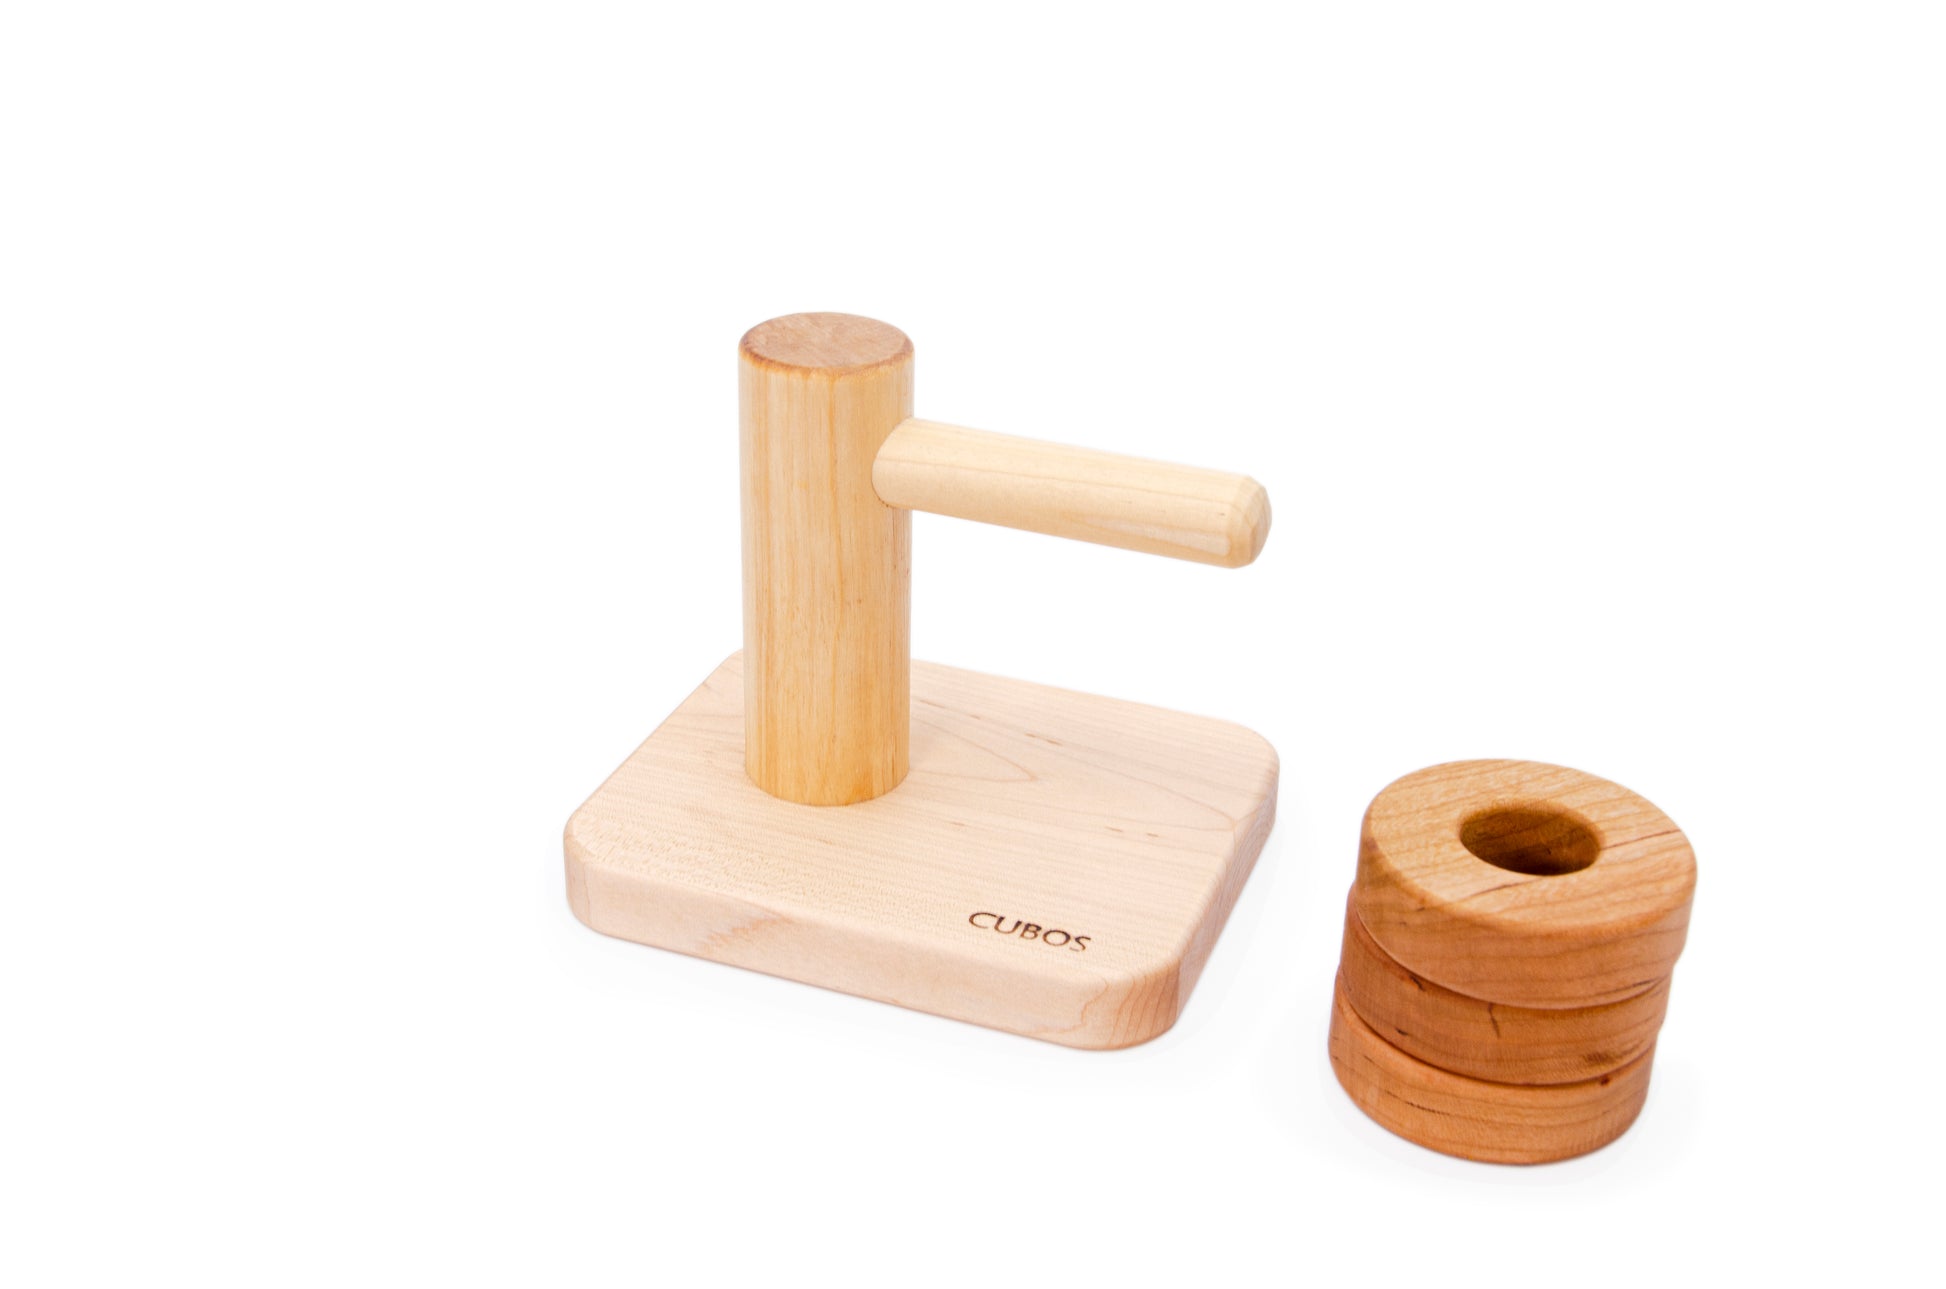 Montessori Horizontal Dowel Rings Stacker - A wooden toy featuring a horizontal dowel with rings of the same size stacked on it, made of hardwood Cherry for durability. 100% natural and finished only with Beeswax, ensuring safety and a natural touch in Montessori education.